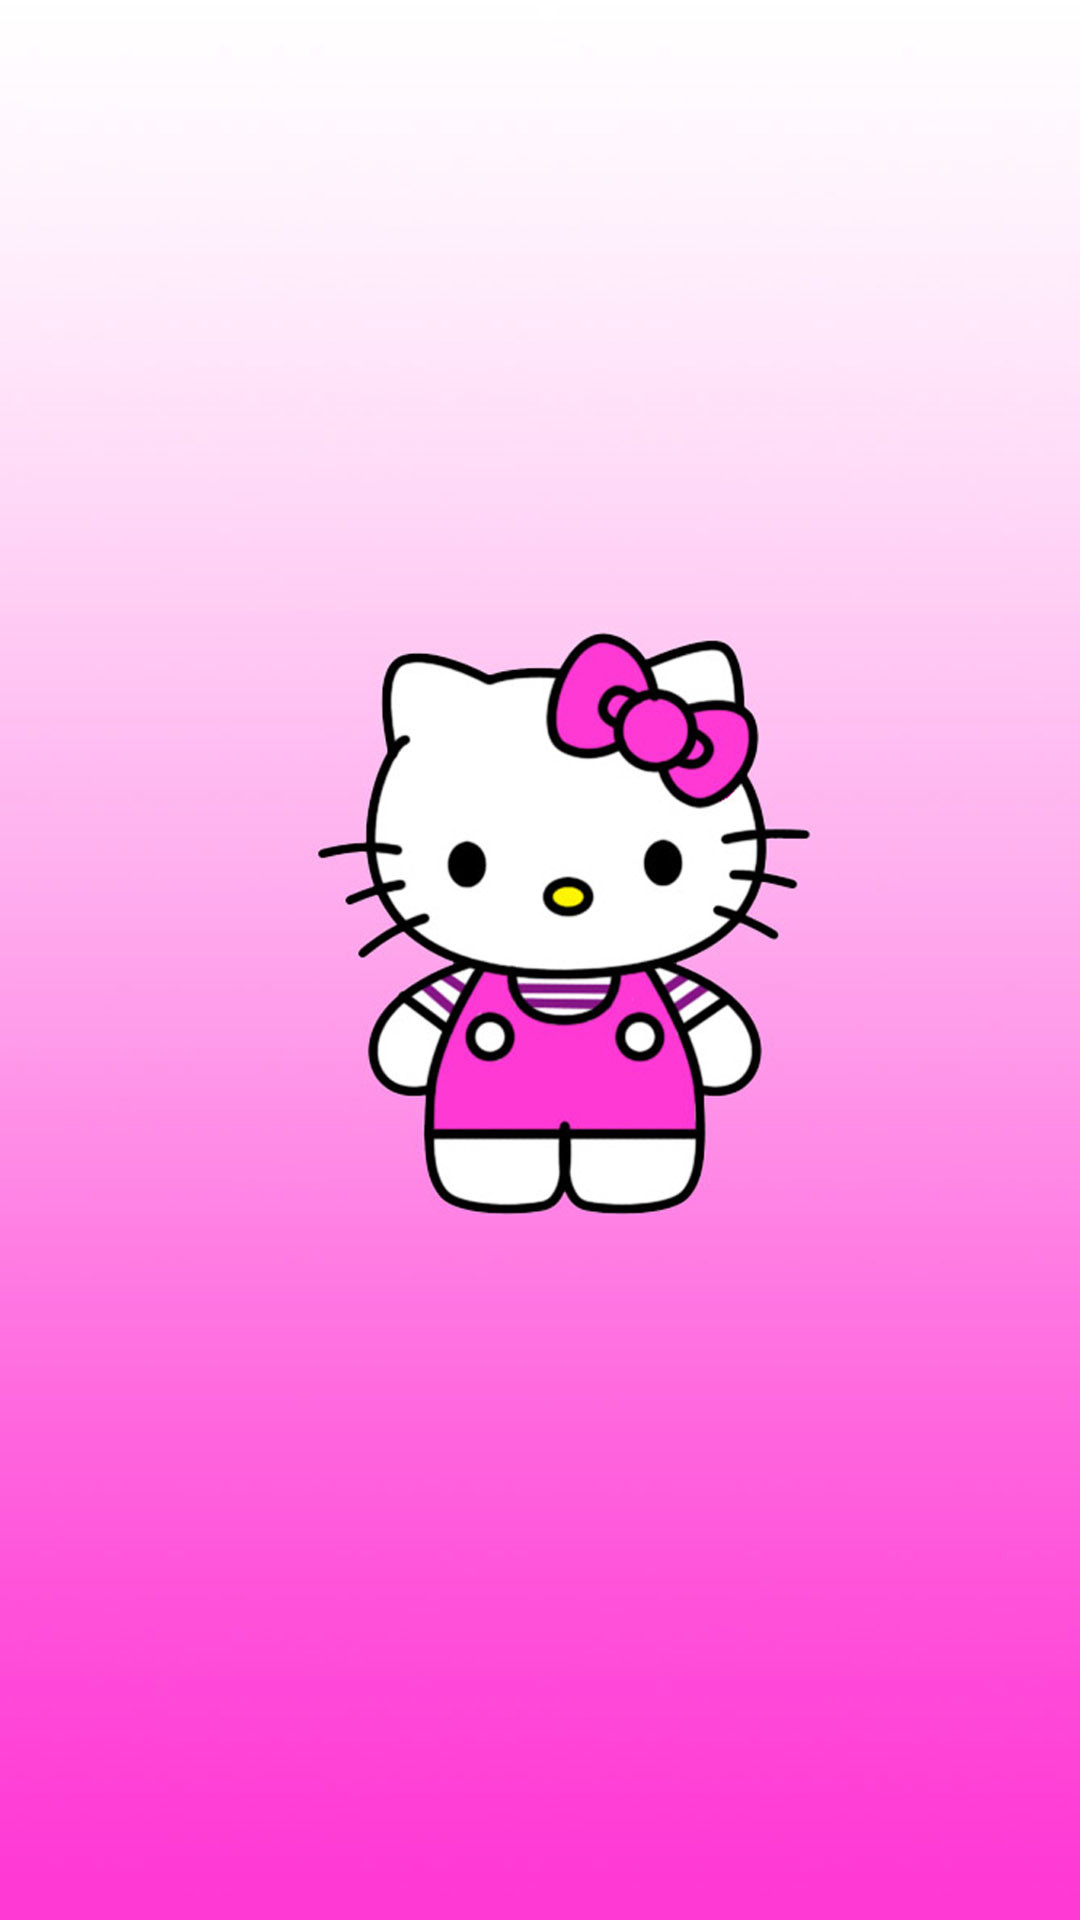 1080x1920 iPhone 6 Plus HD Wallpaper with Hello Kitty Cute Picture | HD .